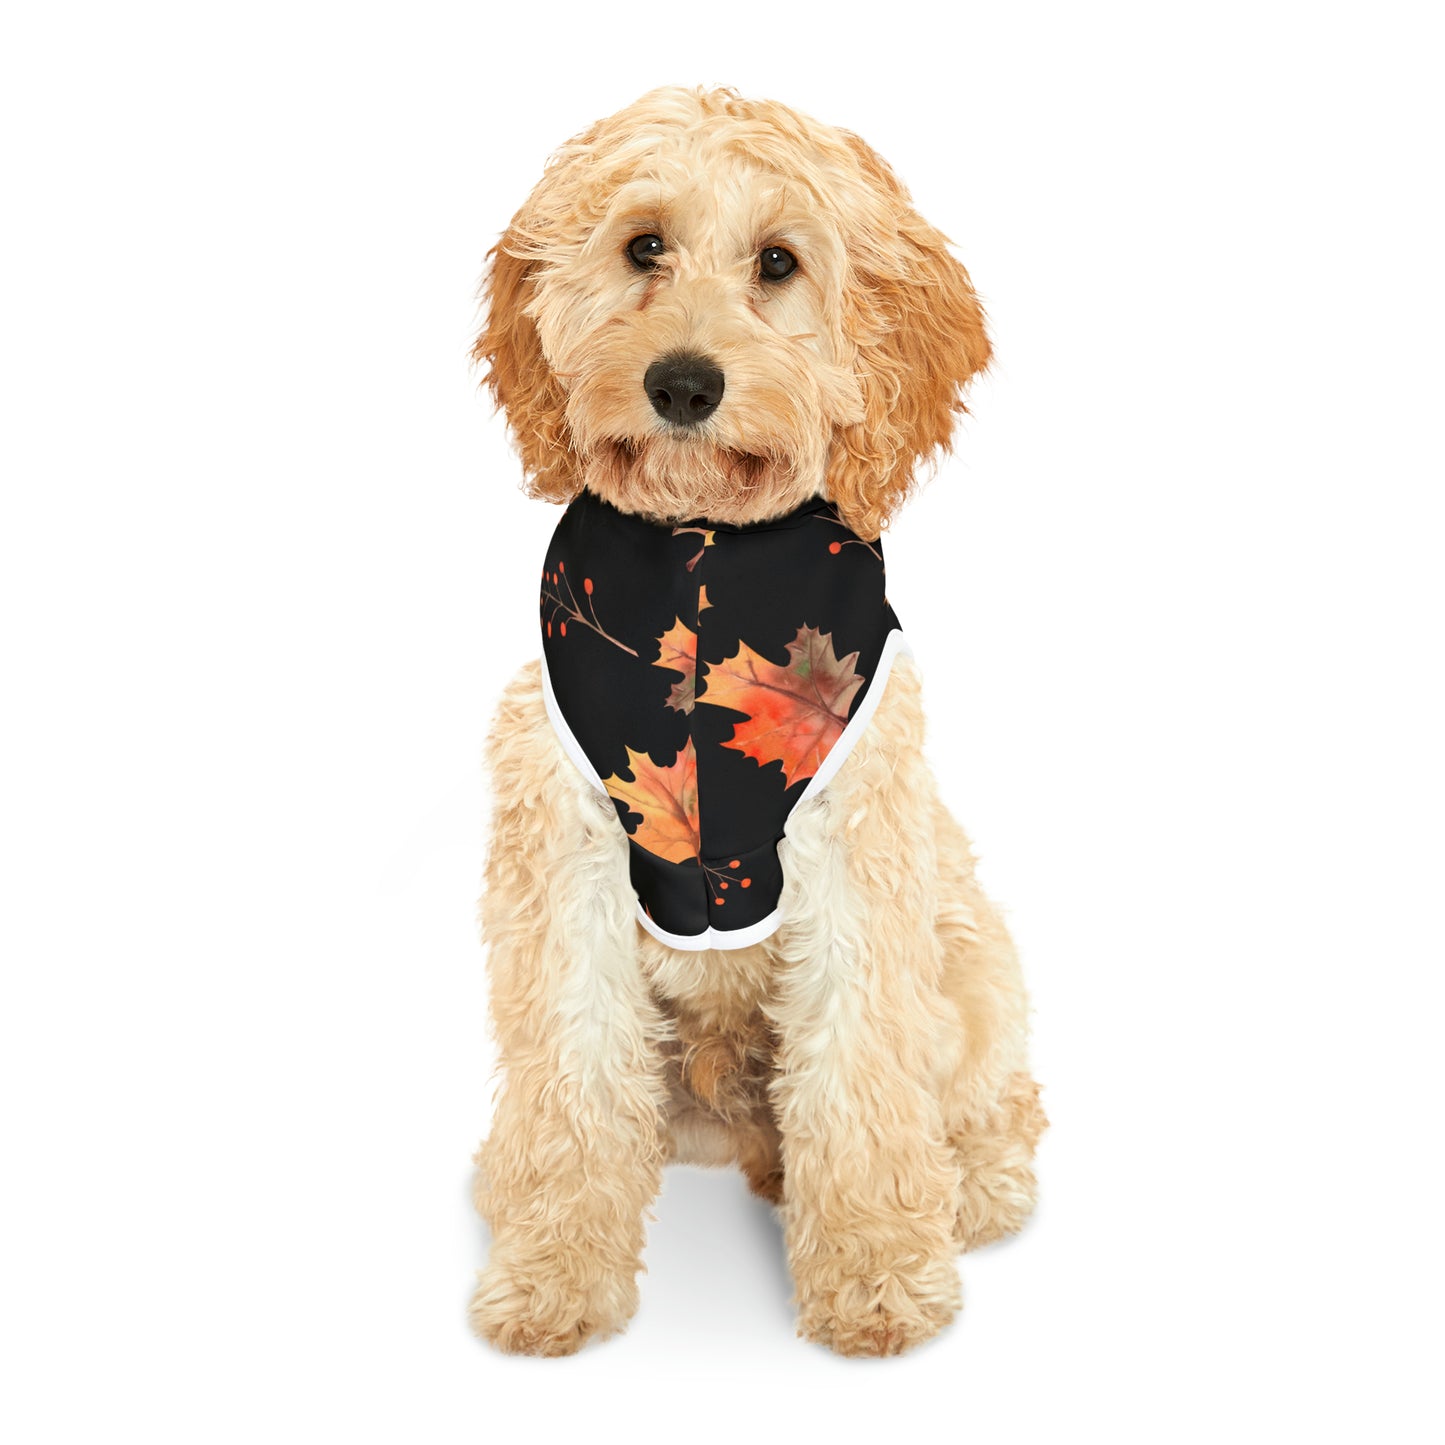 Dog Hoodie - Fall Collection (Fall 2 - With Black Hood)